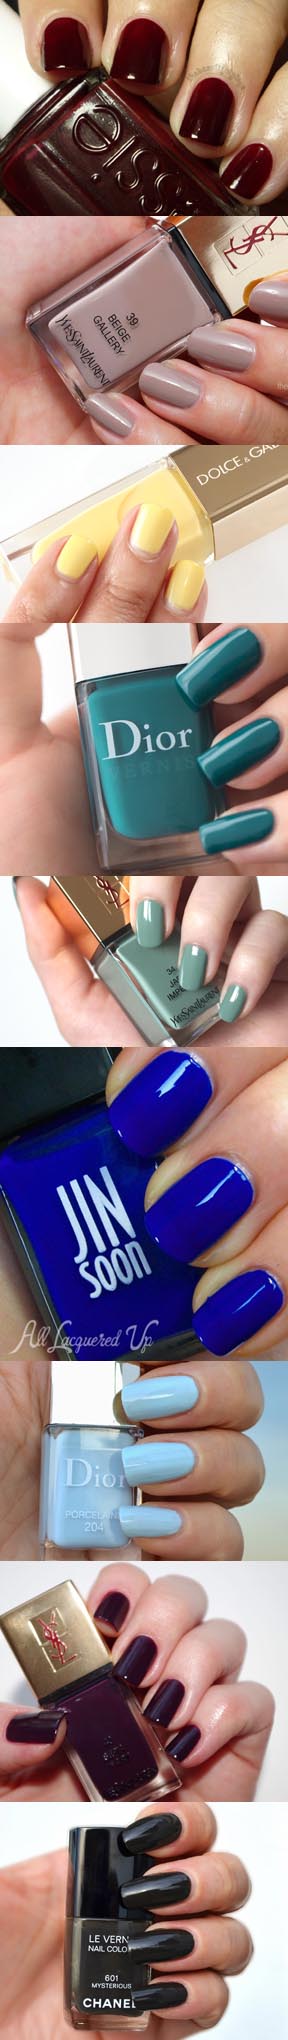 Re: Favorite nail polishes - Beauty Insider Community